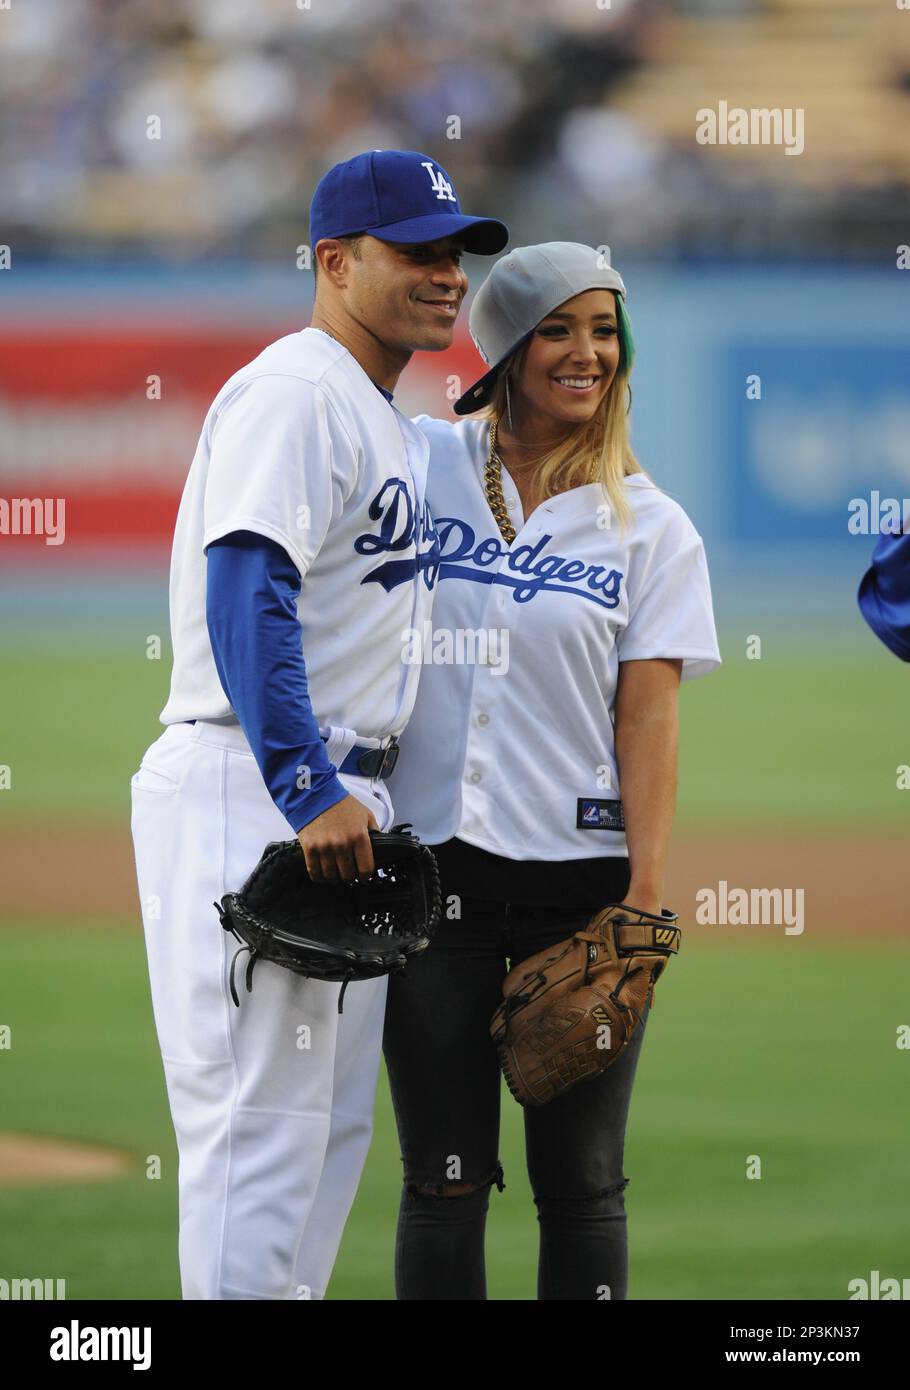 26 July 2013 YouTube sensation Jenna Marbles poses with Los Angeles Dodgers Outfielder Jerry Hairston (6) 2102 after throwing out the first pitch during a Major League Baseball game between the Cincinnati